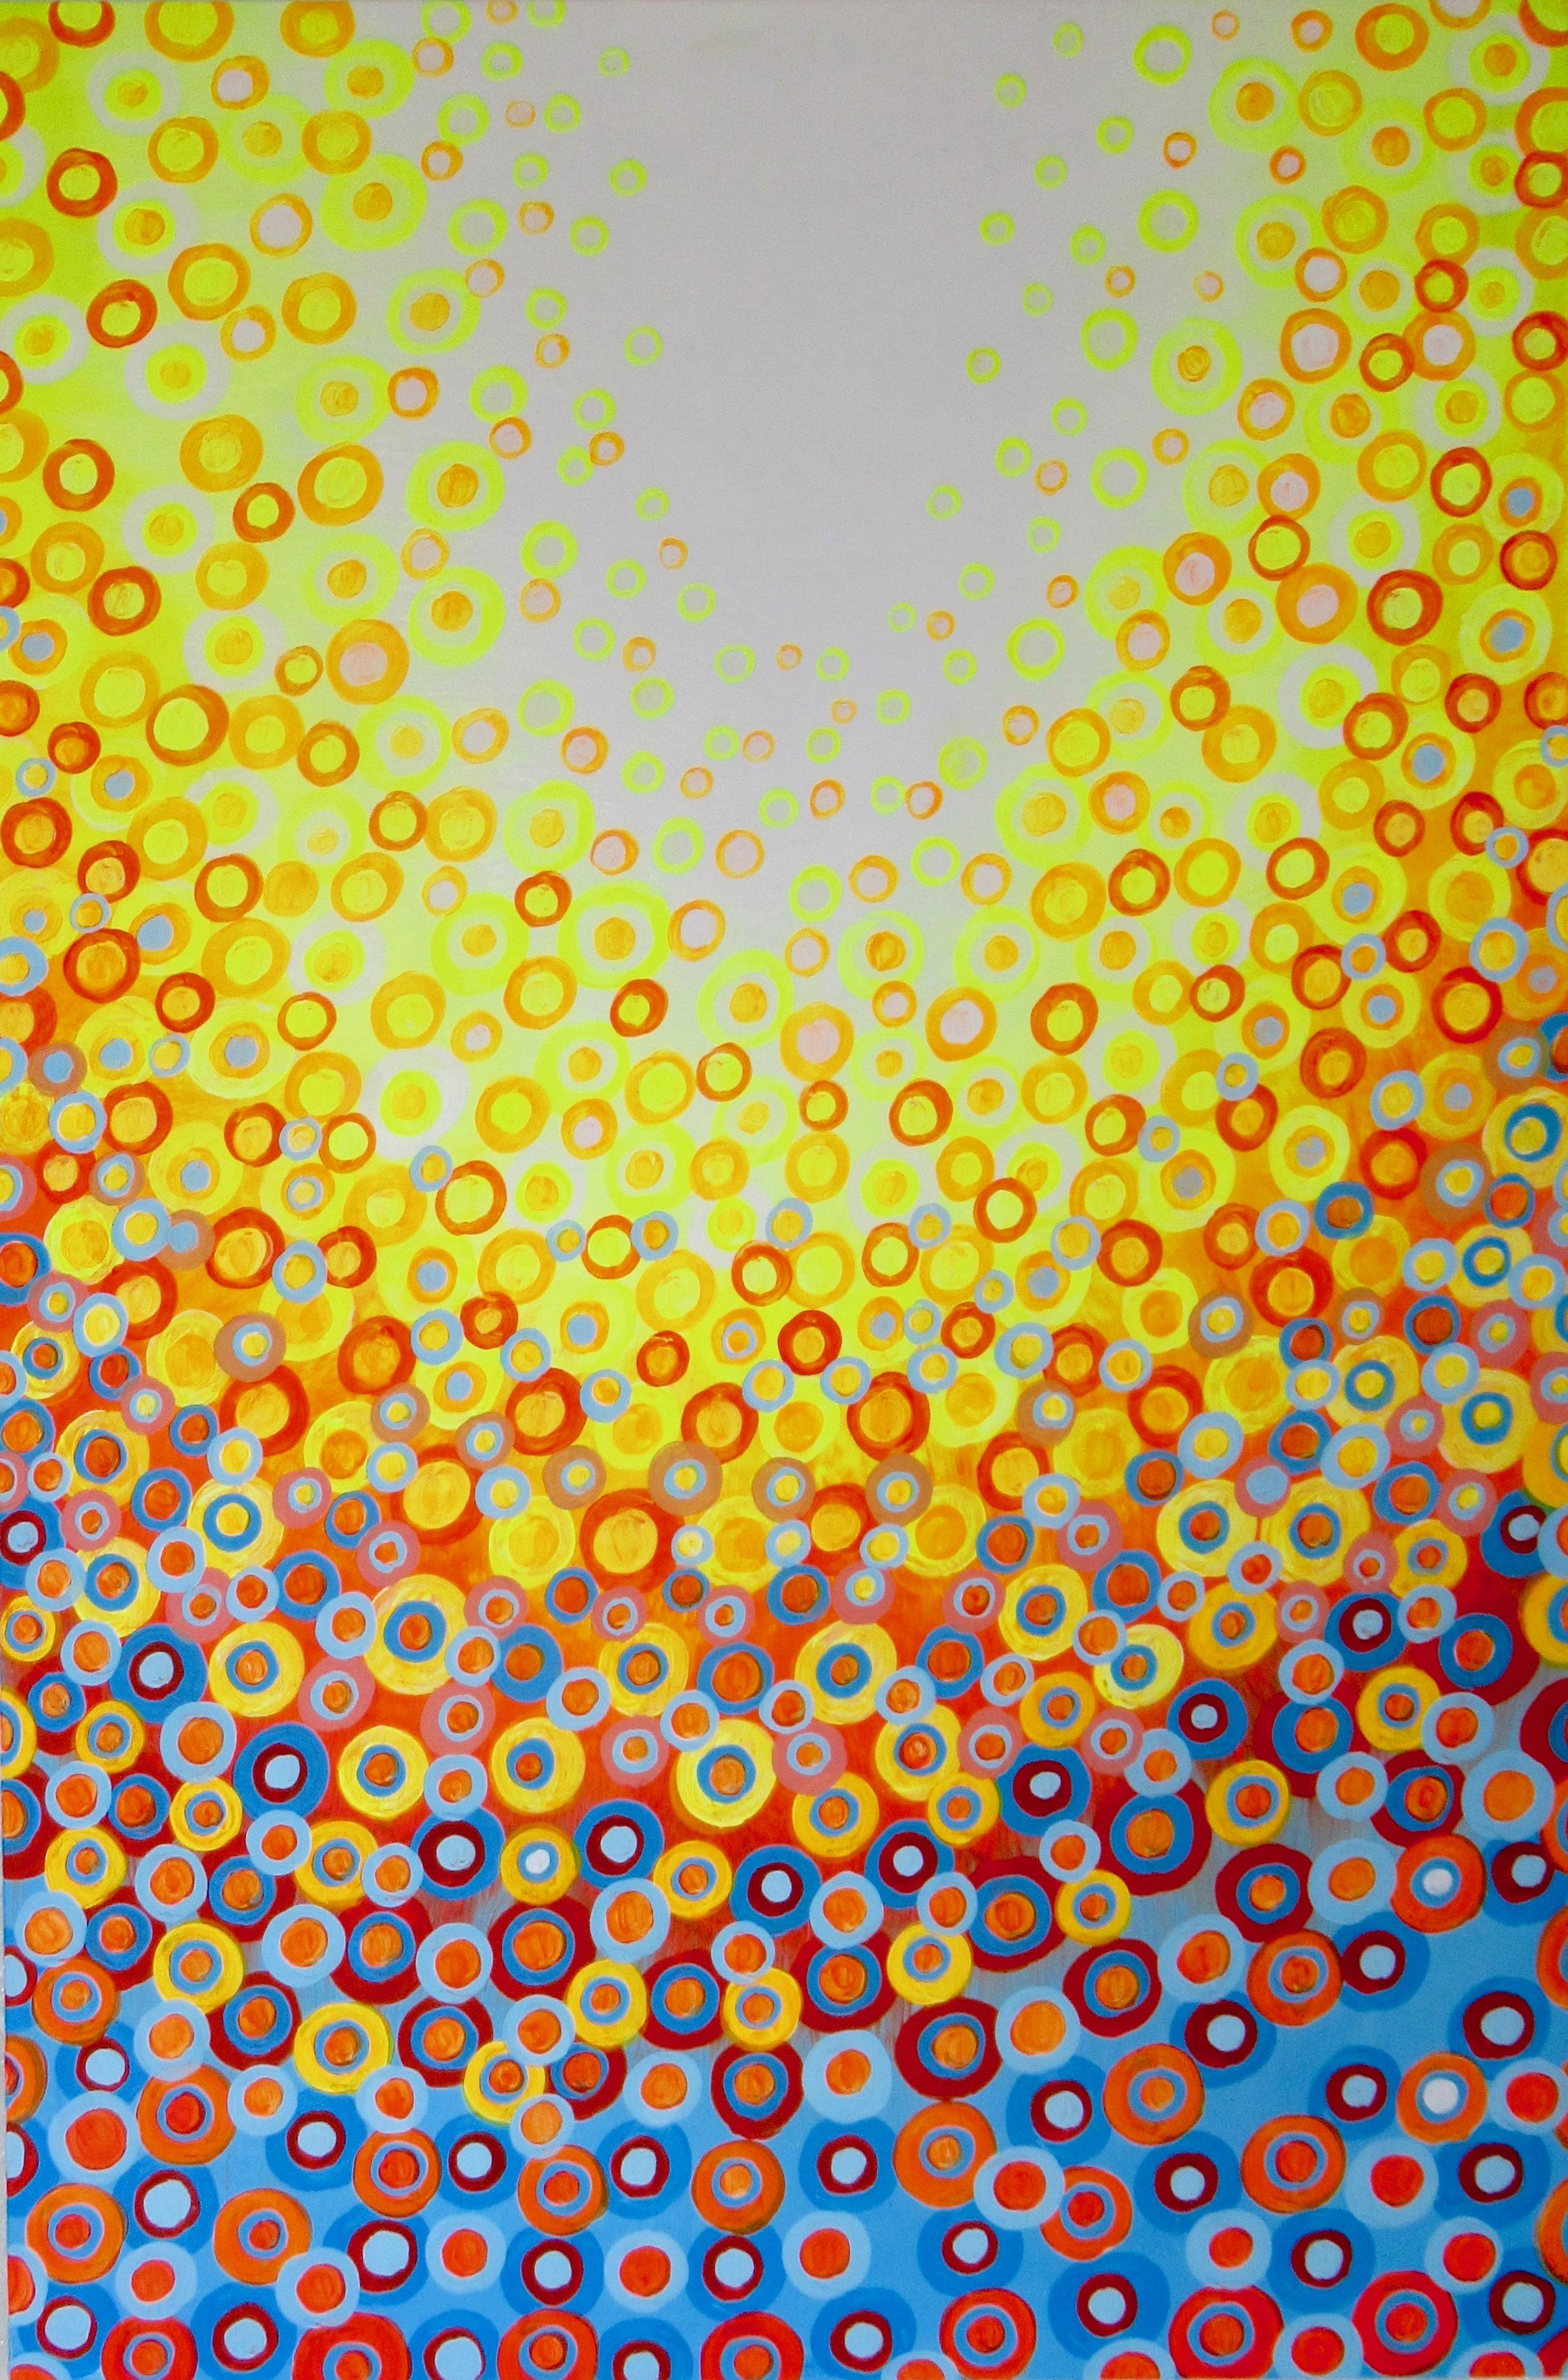 <p>Artist Comments<br>Brilliant yellow, orange, red, and blue orbs fall from the sky, backlit by the bright sunshine. A happy scene, reminiscent of dandelions swaying on a warm spring afternoon. This piece is part of artist Natasha Tayles's